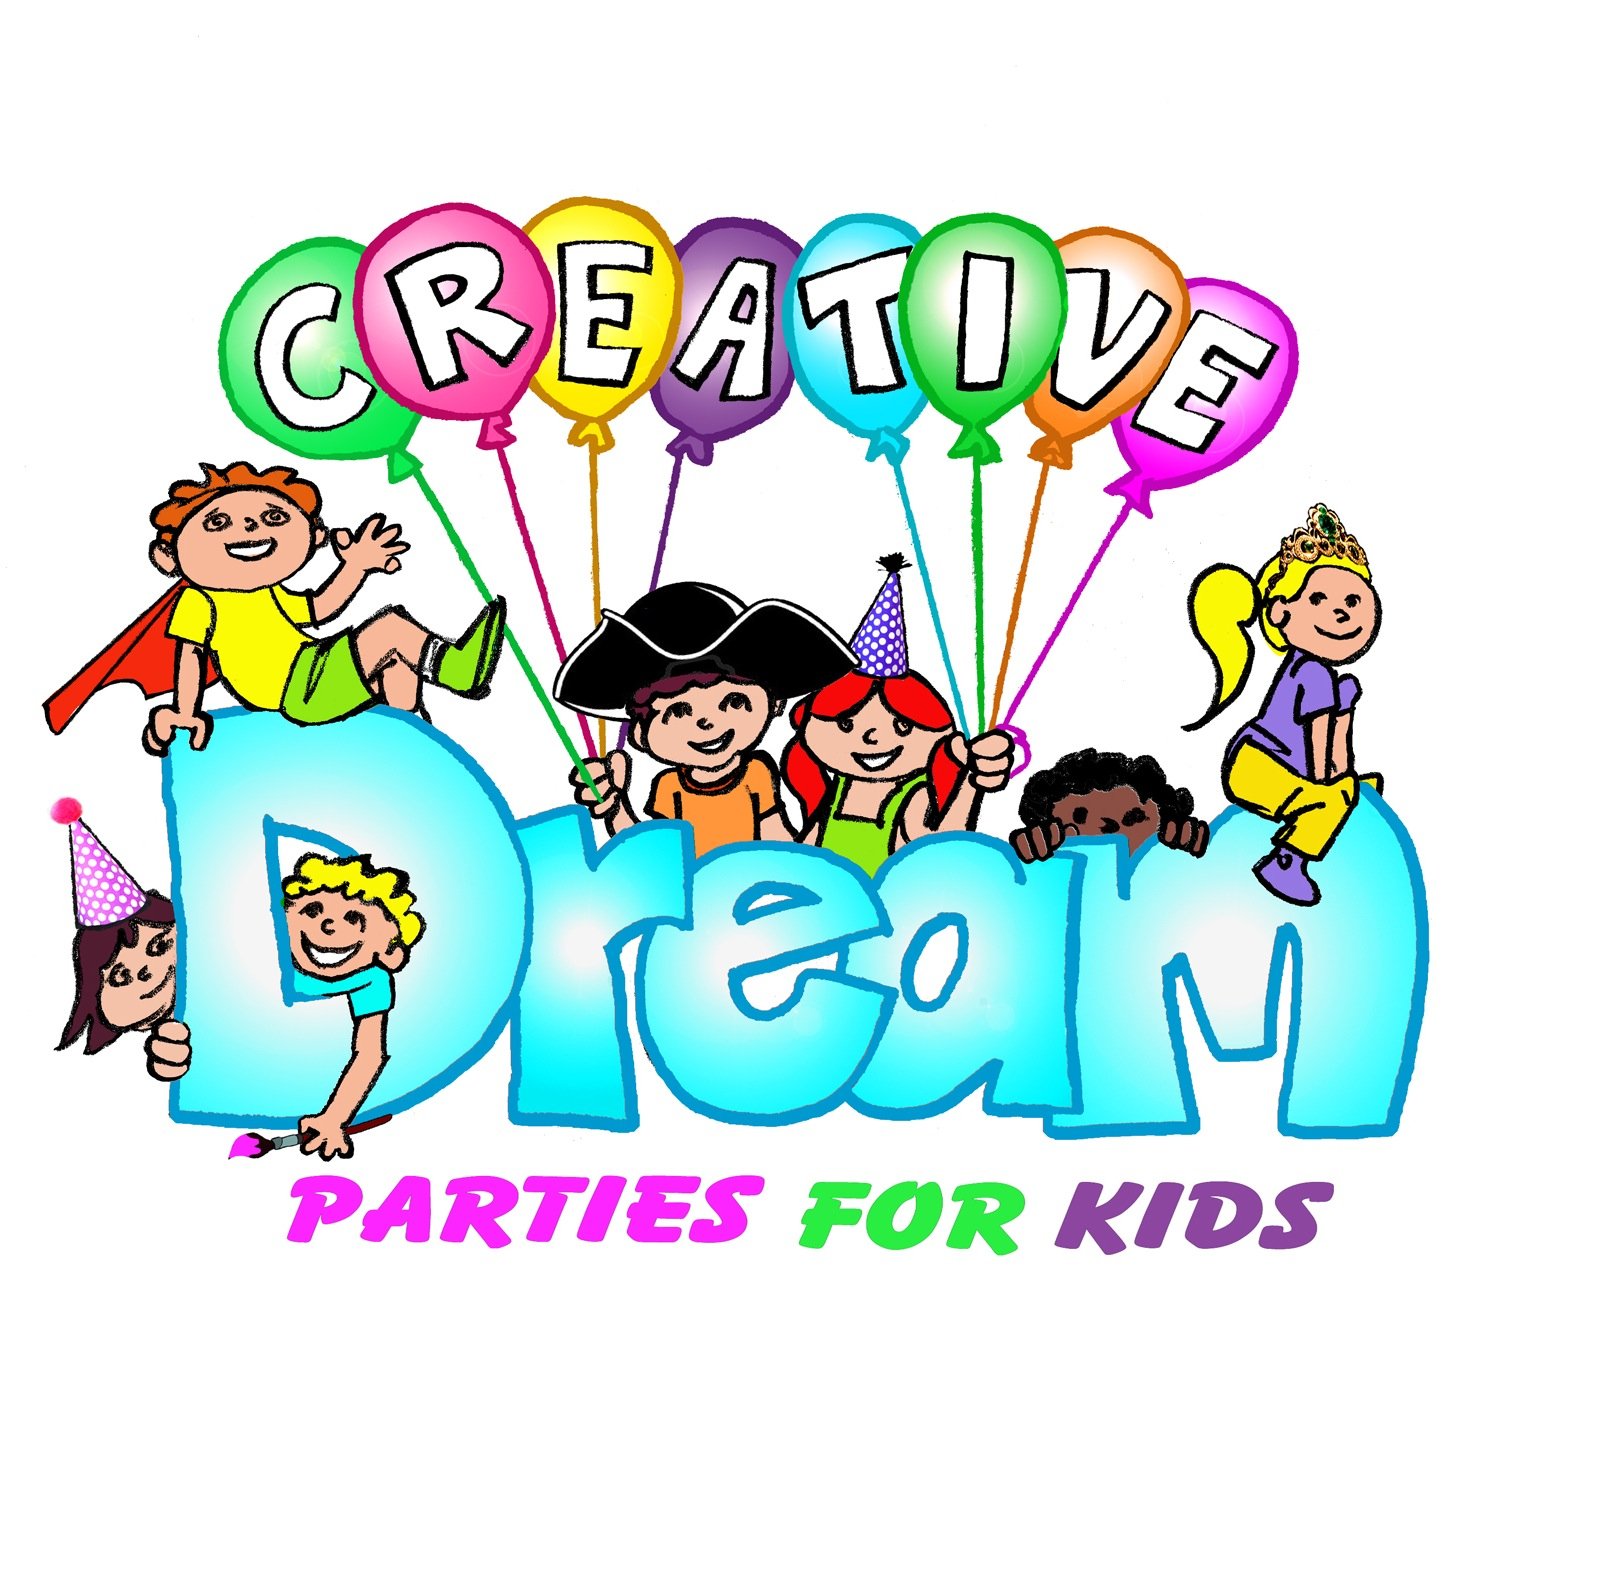 Creative Dream Entertainment is your #1 SOURCE for the BEST Children's Themed Parties 212.447.7269 parties@createdreams.com | Offsite Hosting Available*